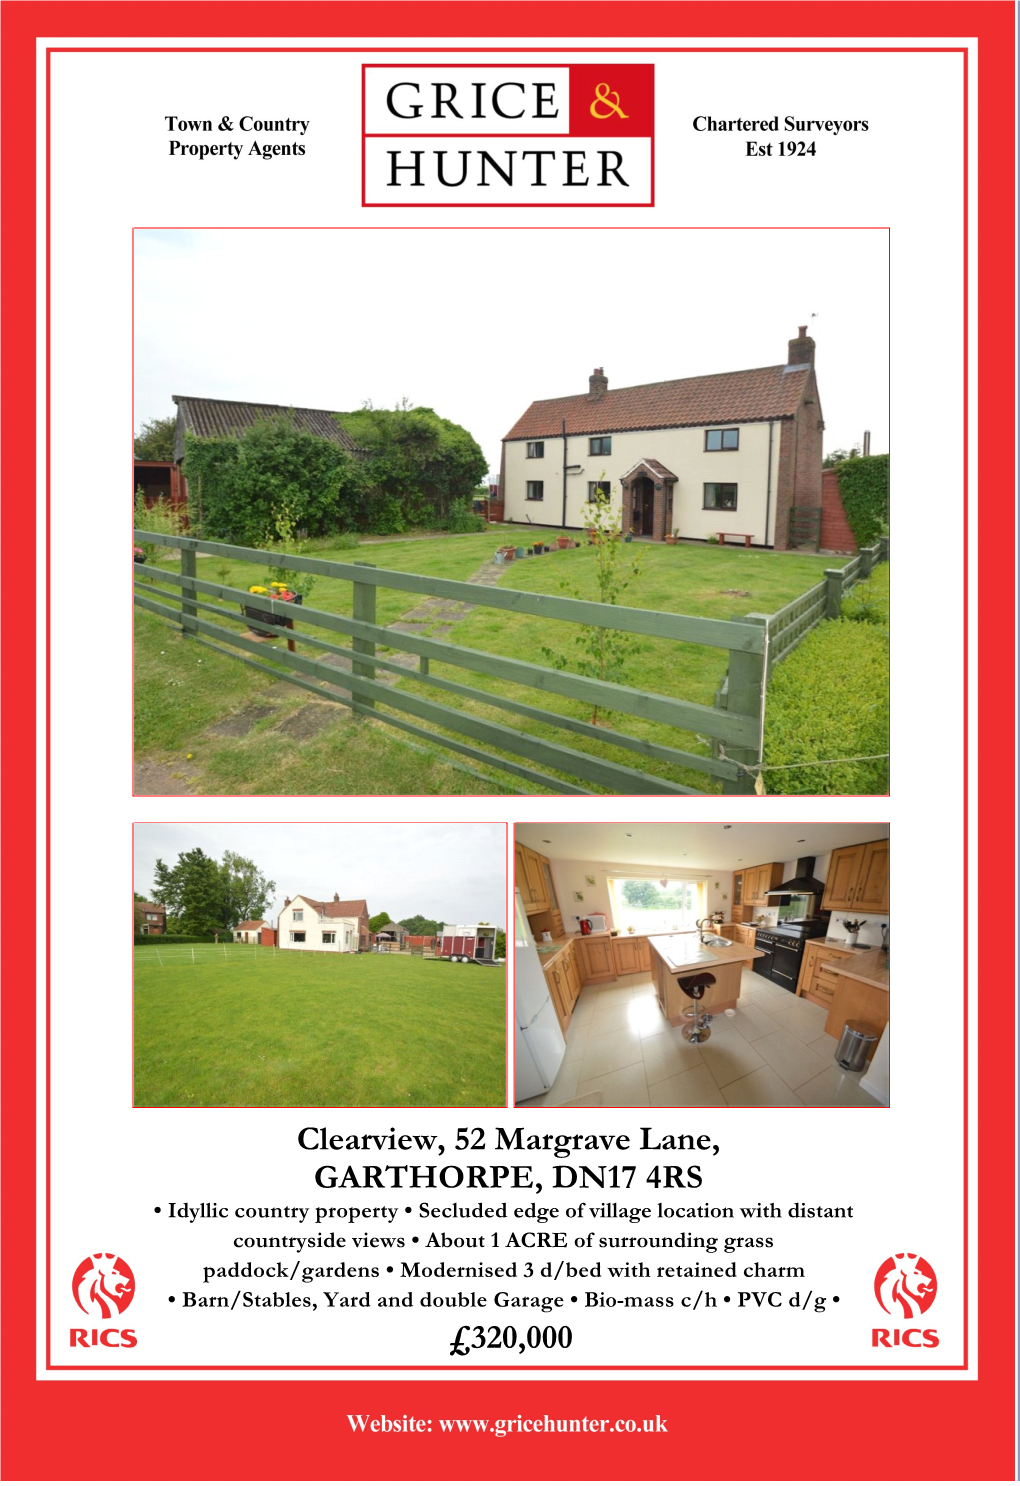 Clearview, 52 Margrave Lane, GARTHORPE, DN17 4RS £320,000